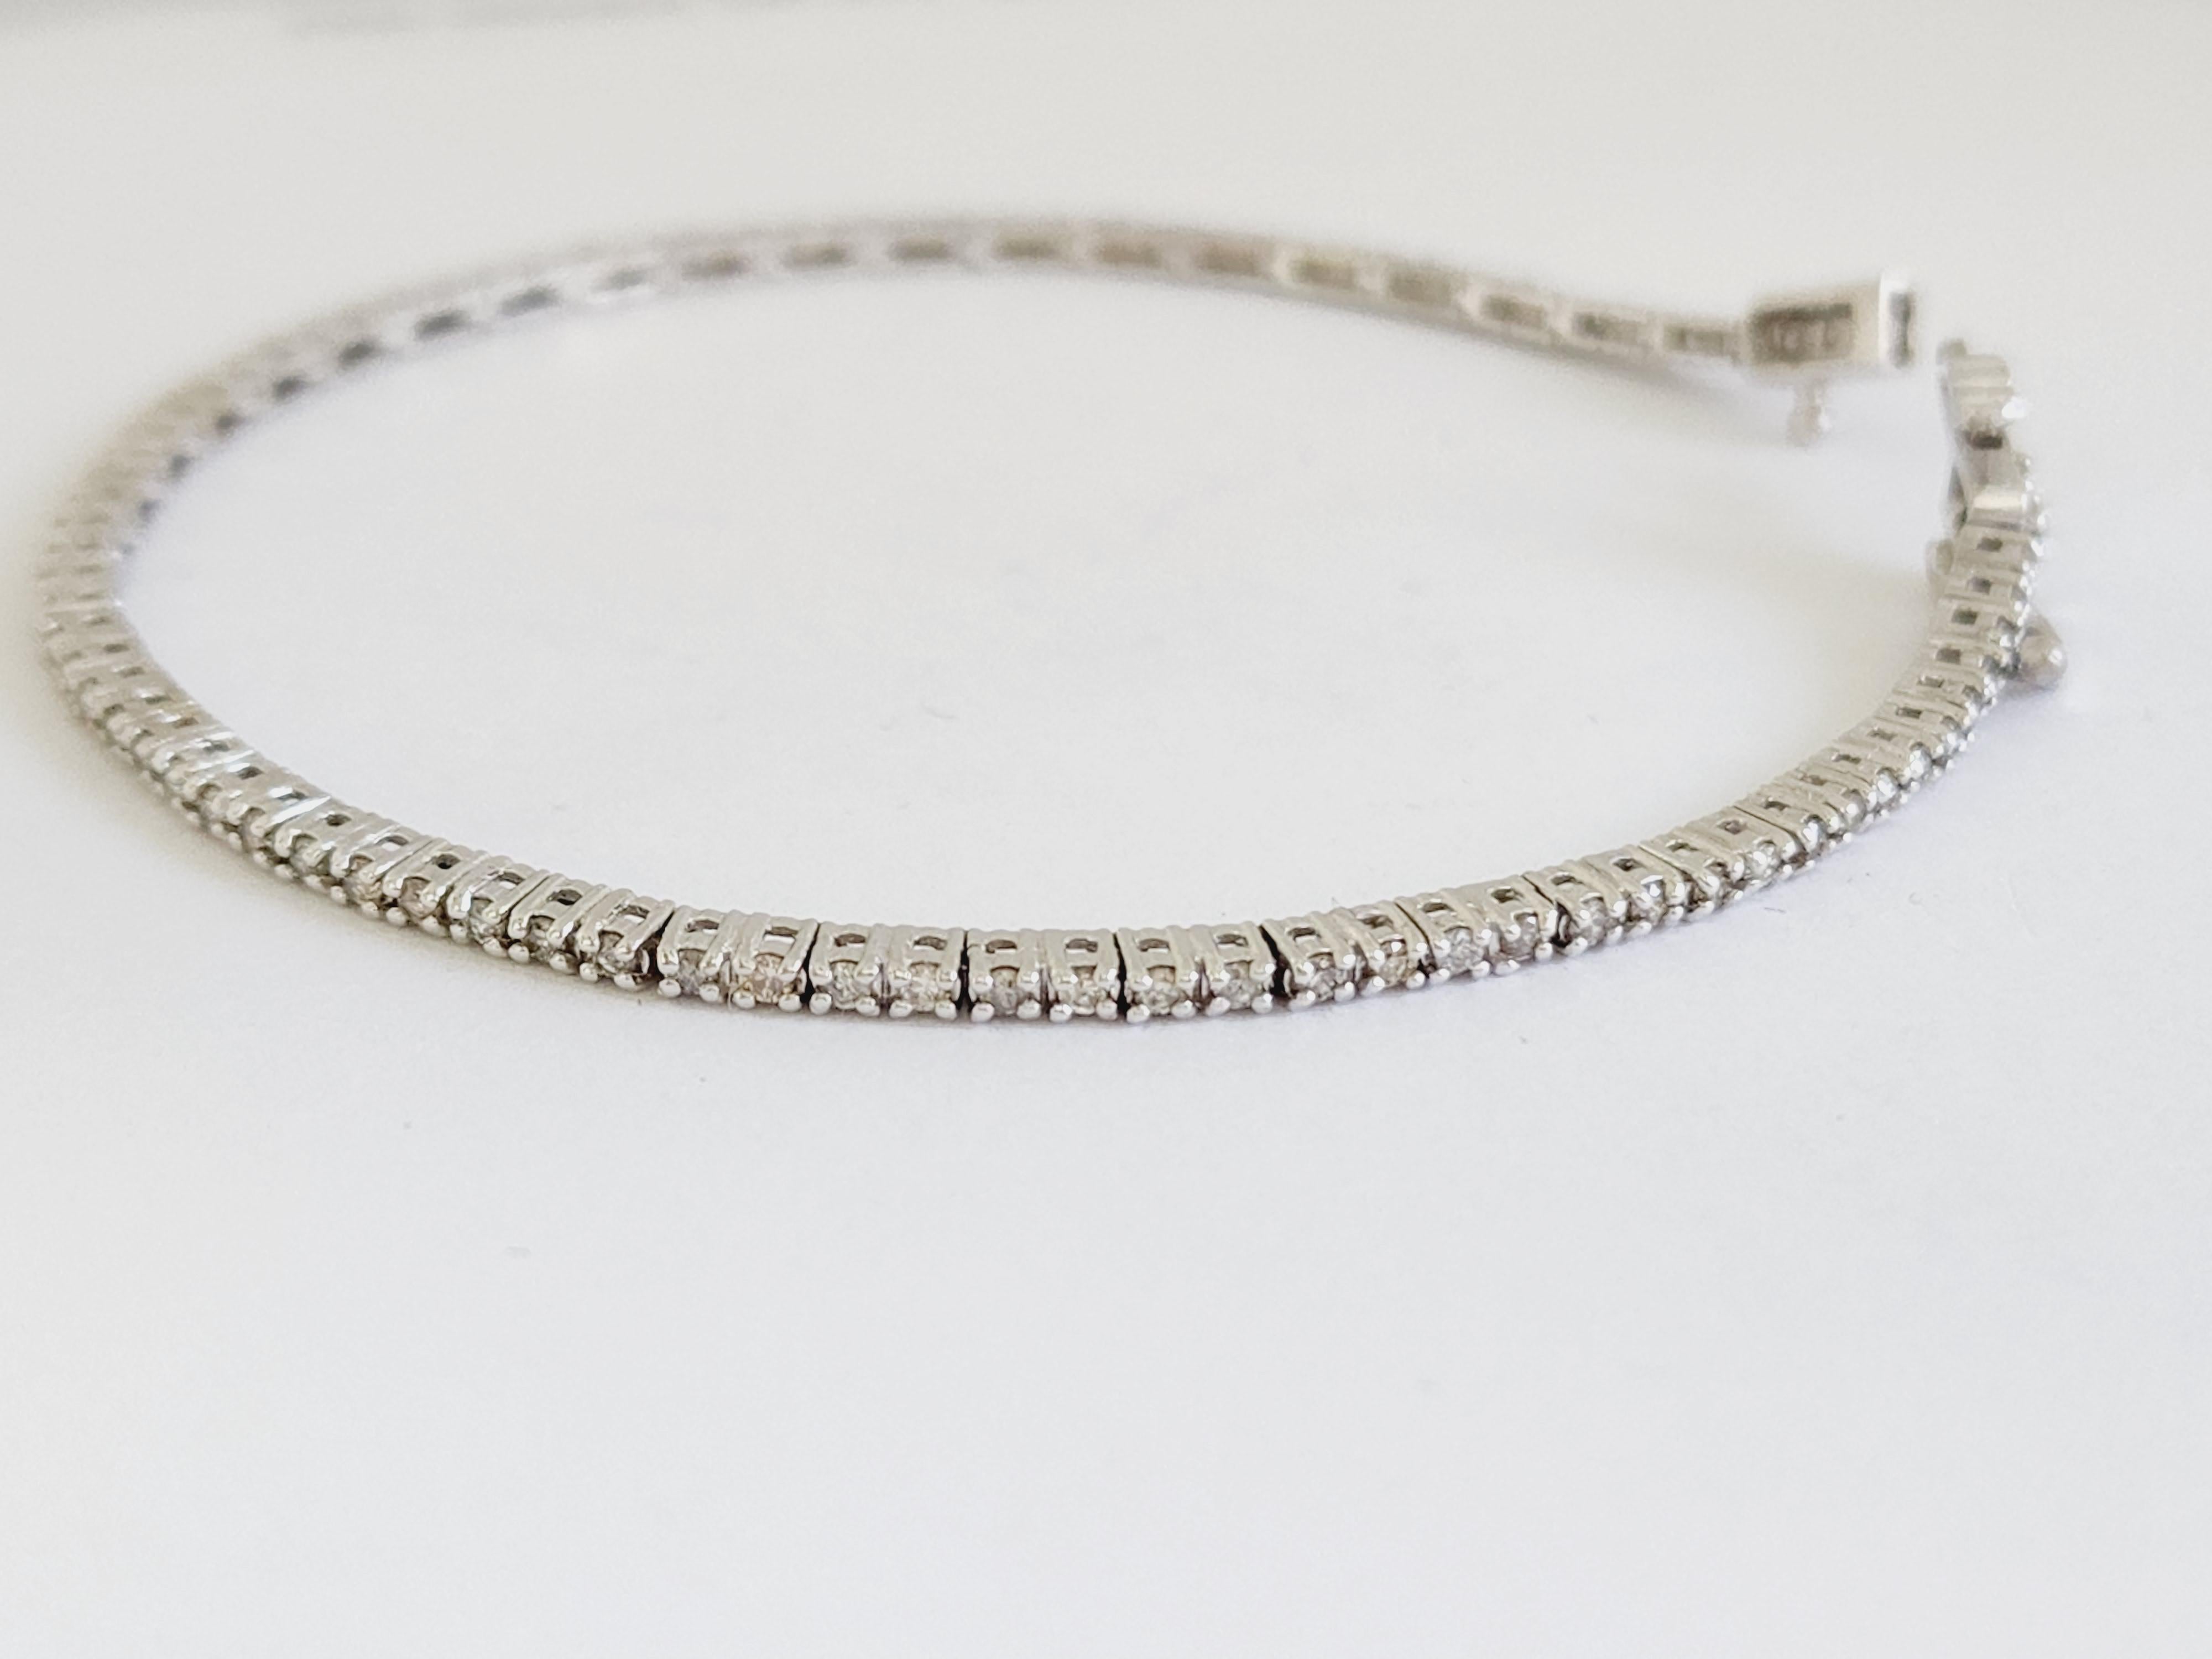 1.05 Carat Round Brilliant Cut Diamond Tennis Bracelet 14 Karat White Gold In New Condition For Sale In Great Neck, NY